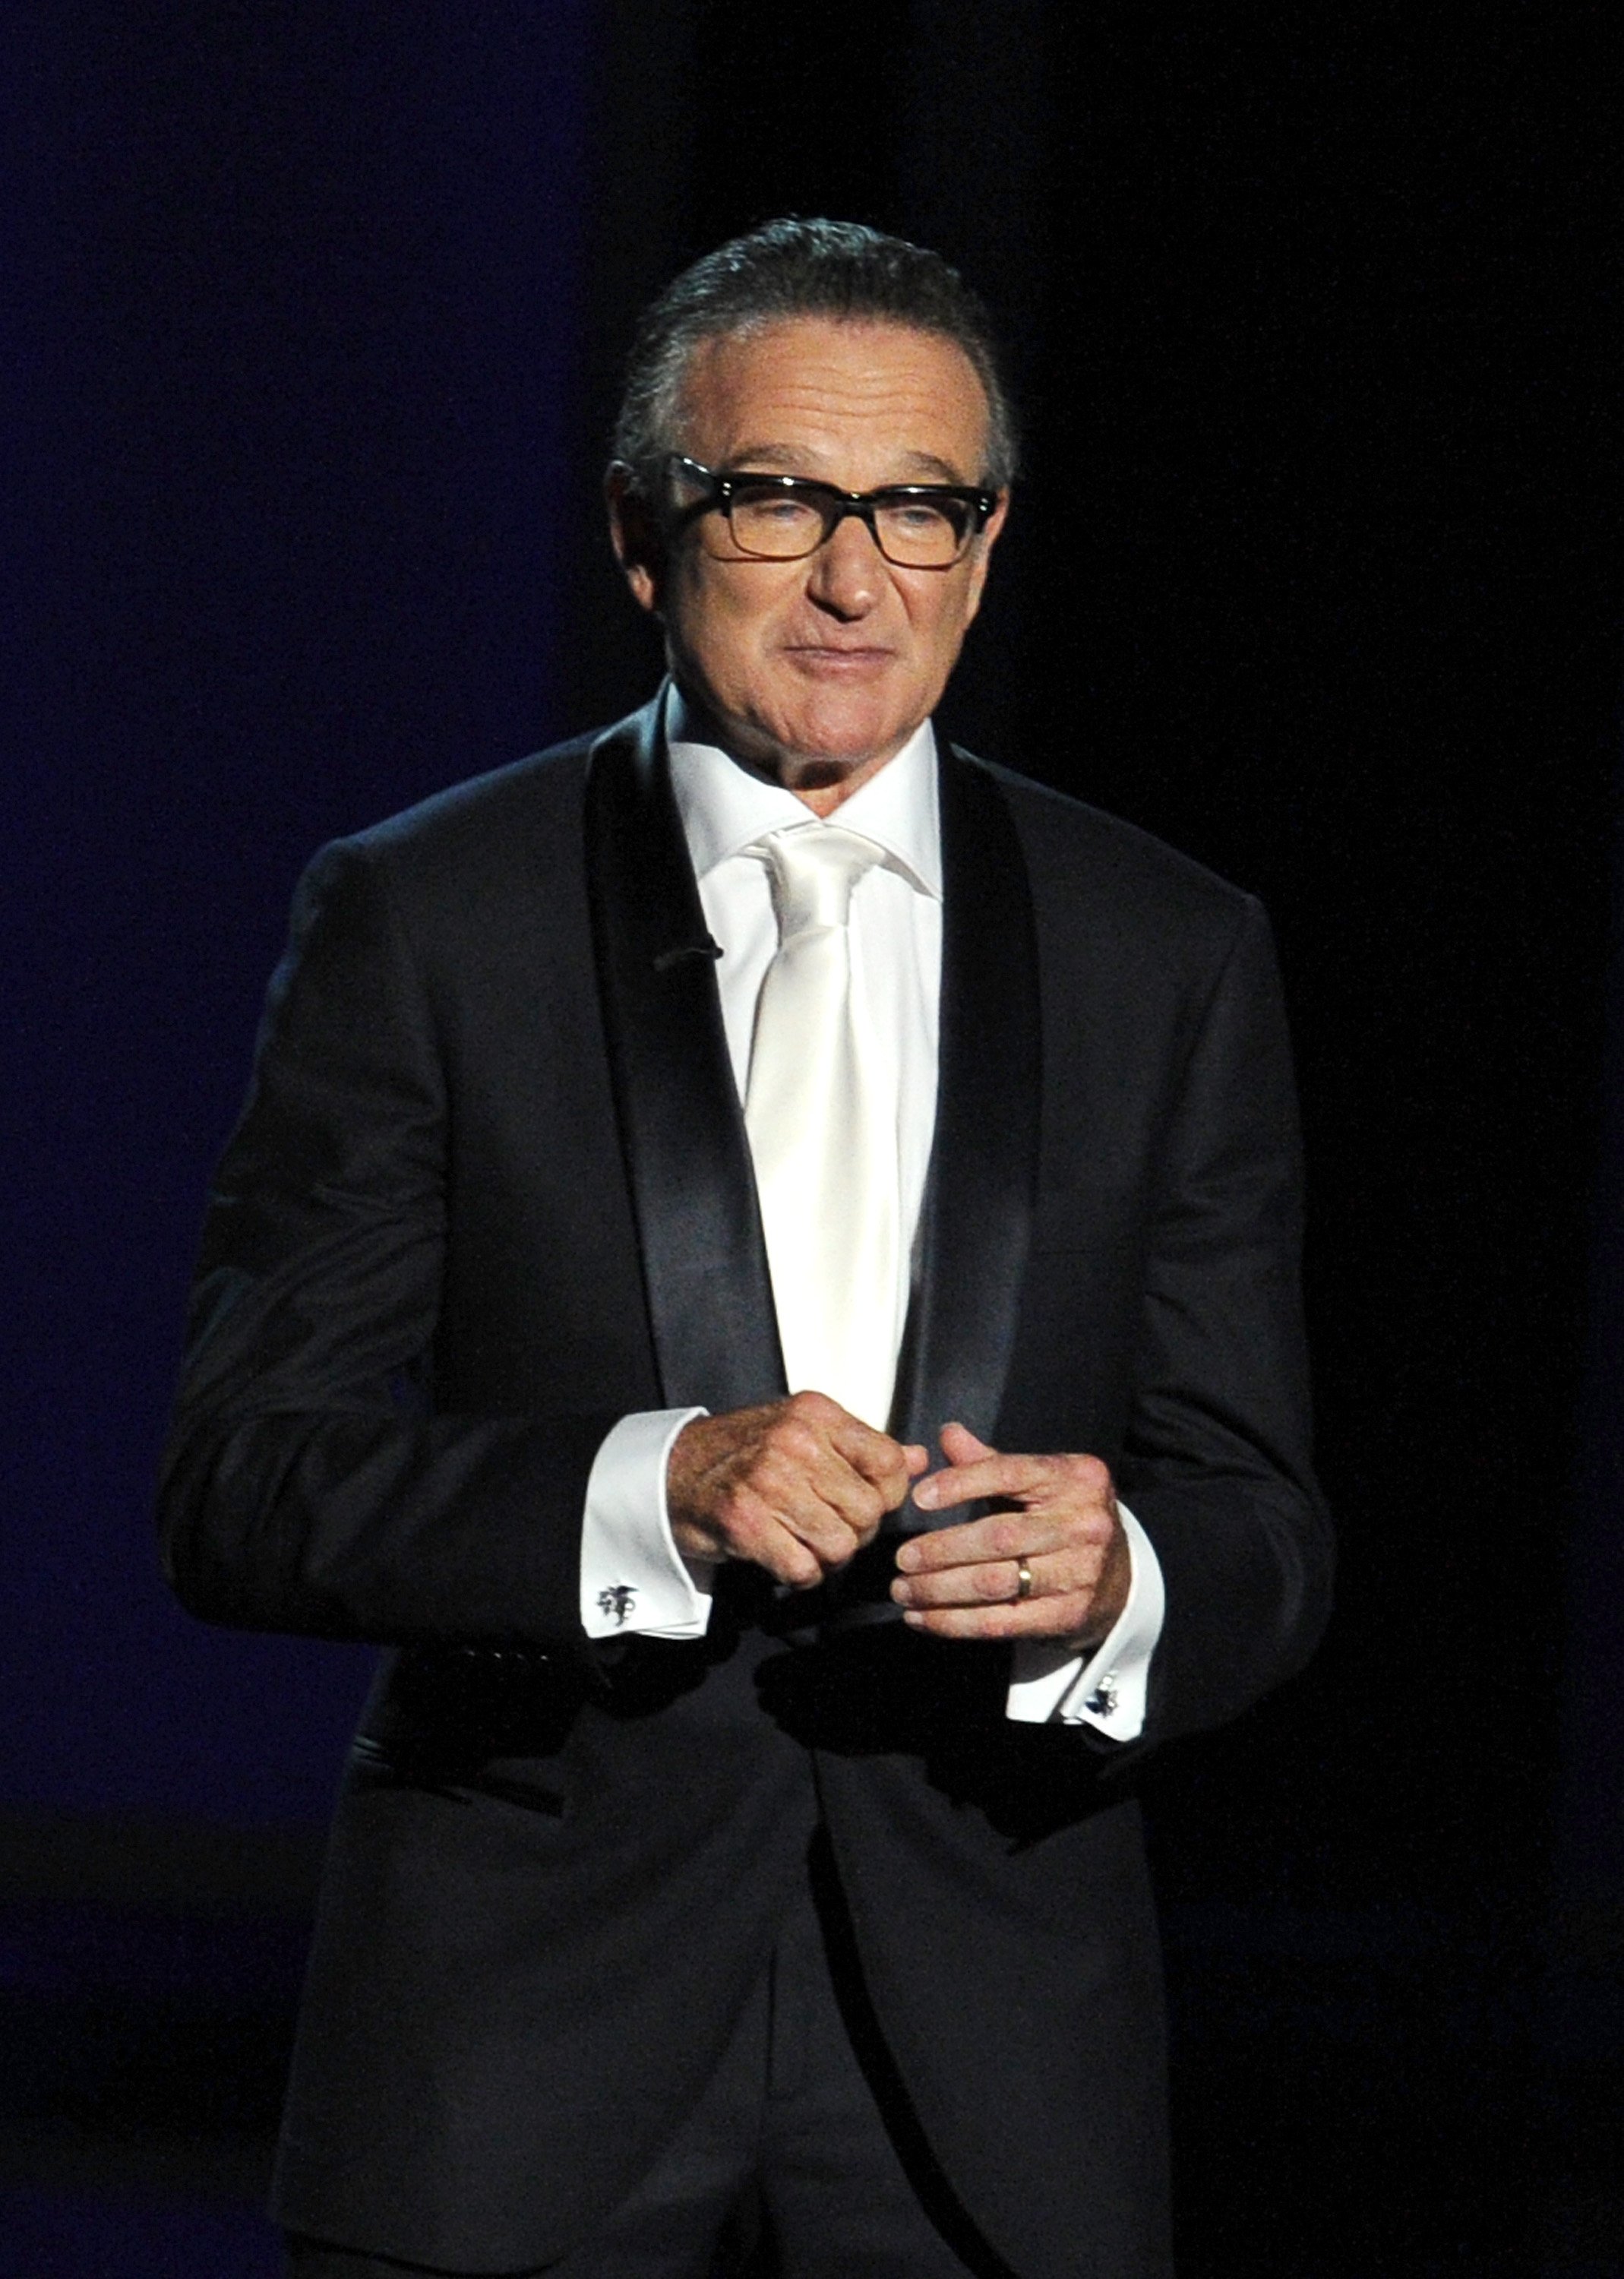 Robin Williams speaks at the Primetime Emmy Awards in Los Angeles, California on September 22, 2013 | Photo: Getty Images